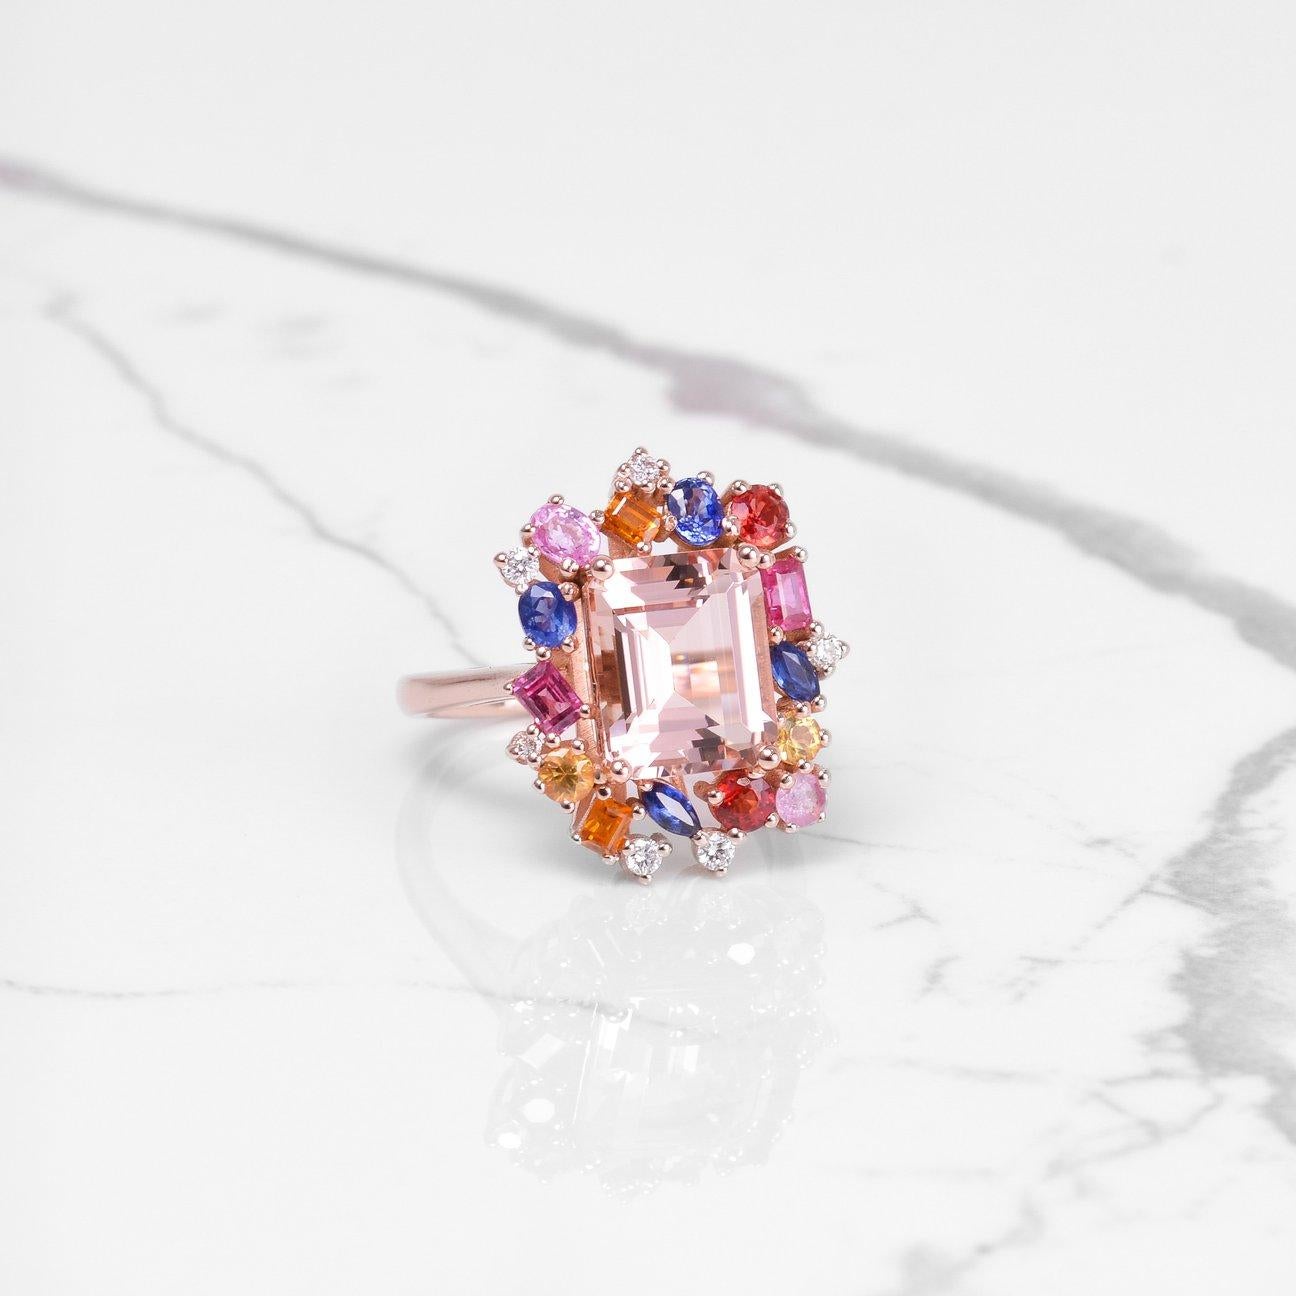 This ring is absolutely magnificent and full of beautiful colors! The main stone is a gorgeous emerald cut morganite that is 4.02 carats. Surrounding the morganite is a beautiful colorful halo of sapphires and diamonds that are cut in different